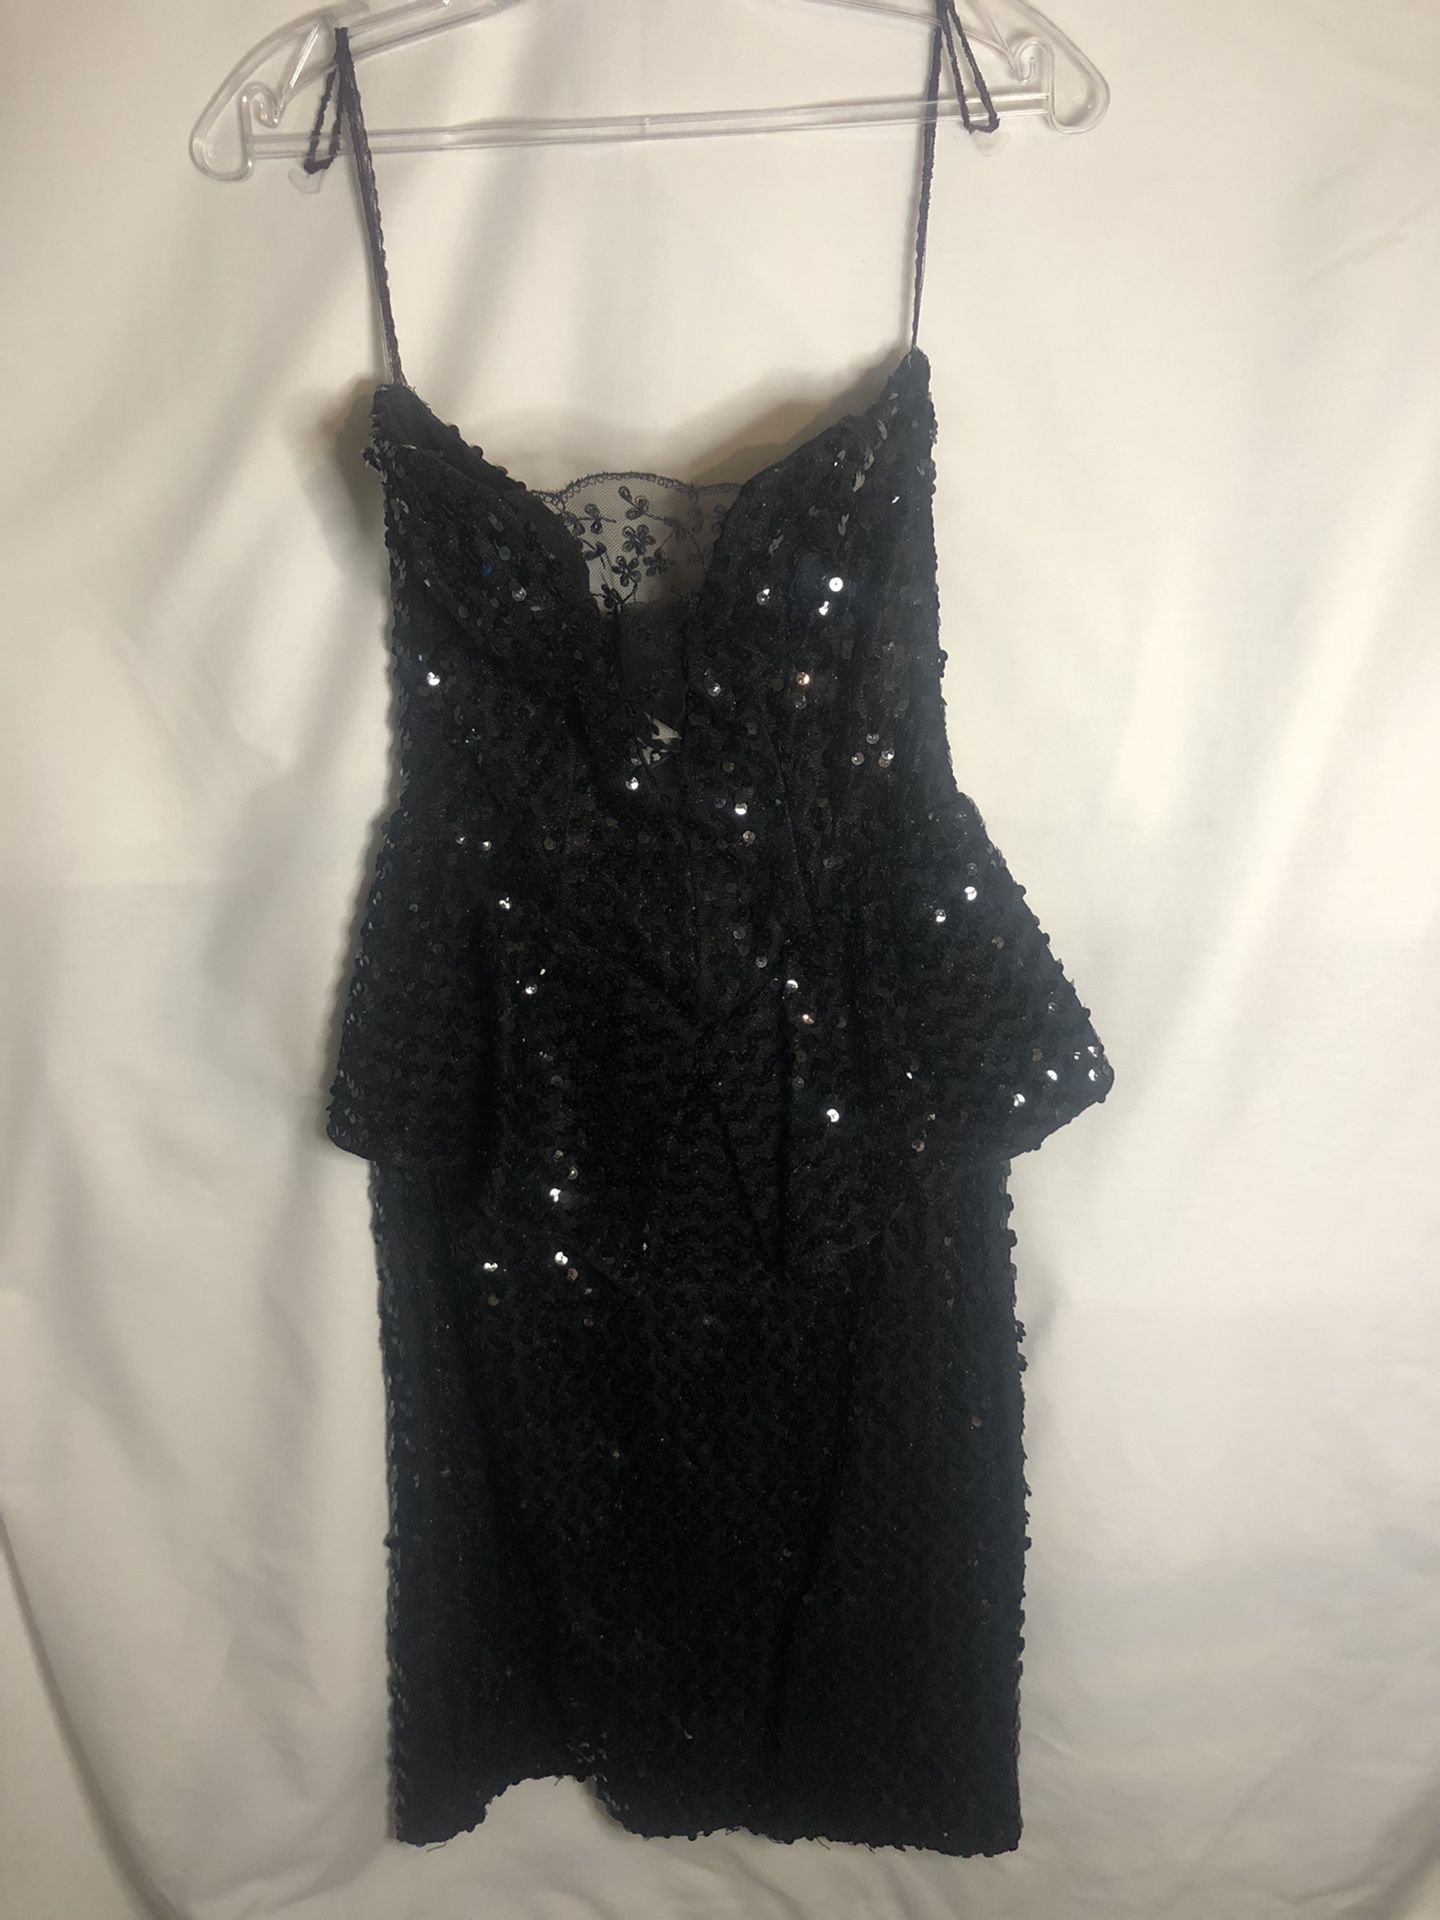 Dress/  Junior Size / Special Event(Homecoming , party )